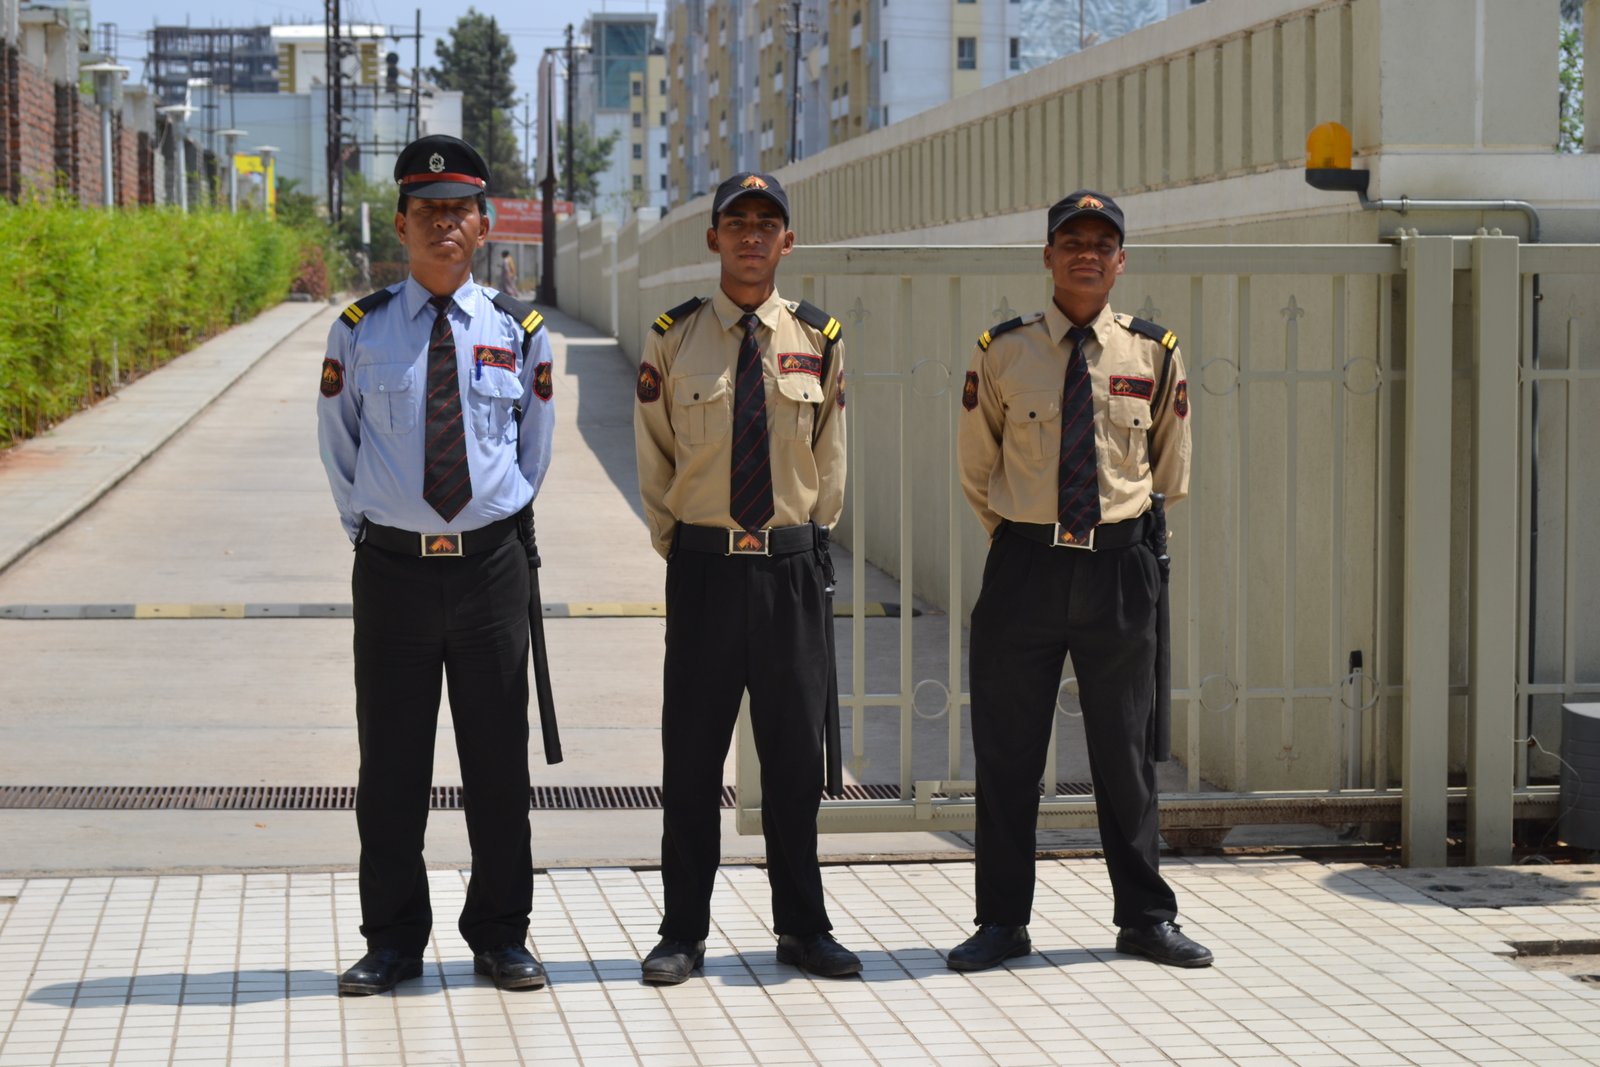 SECURITY SERVICES